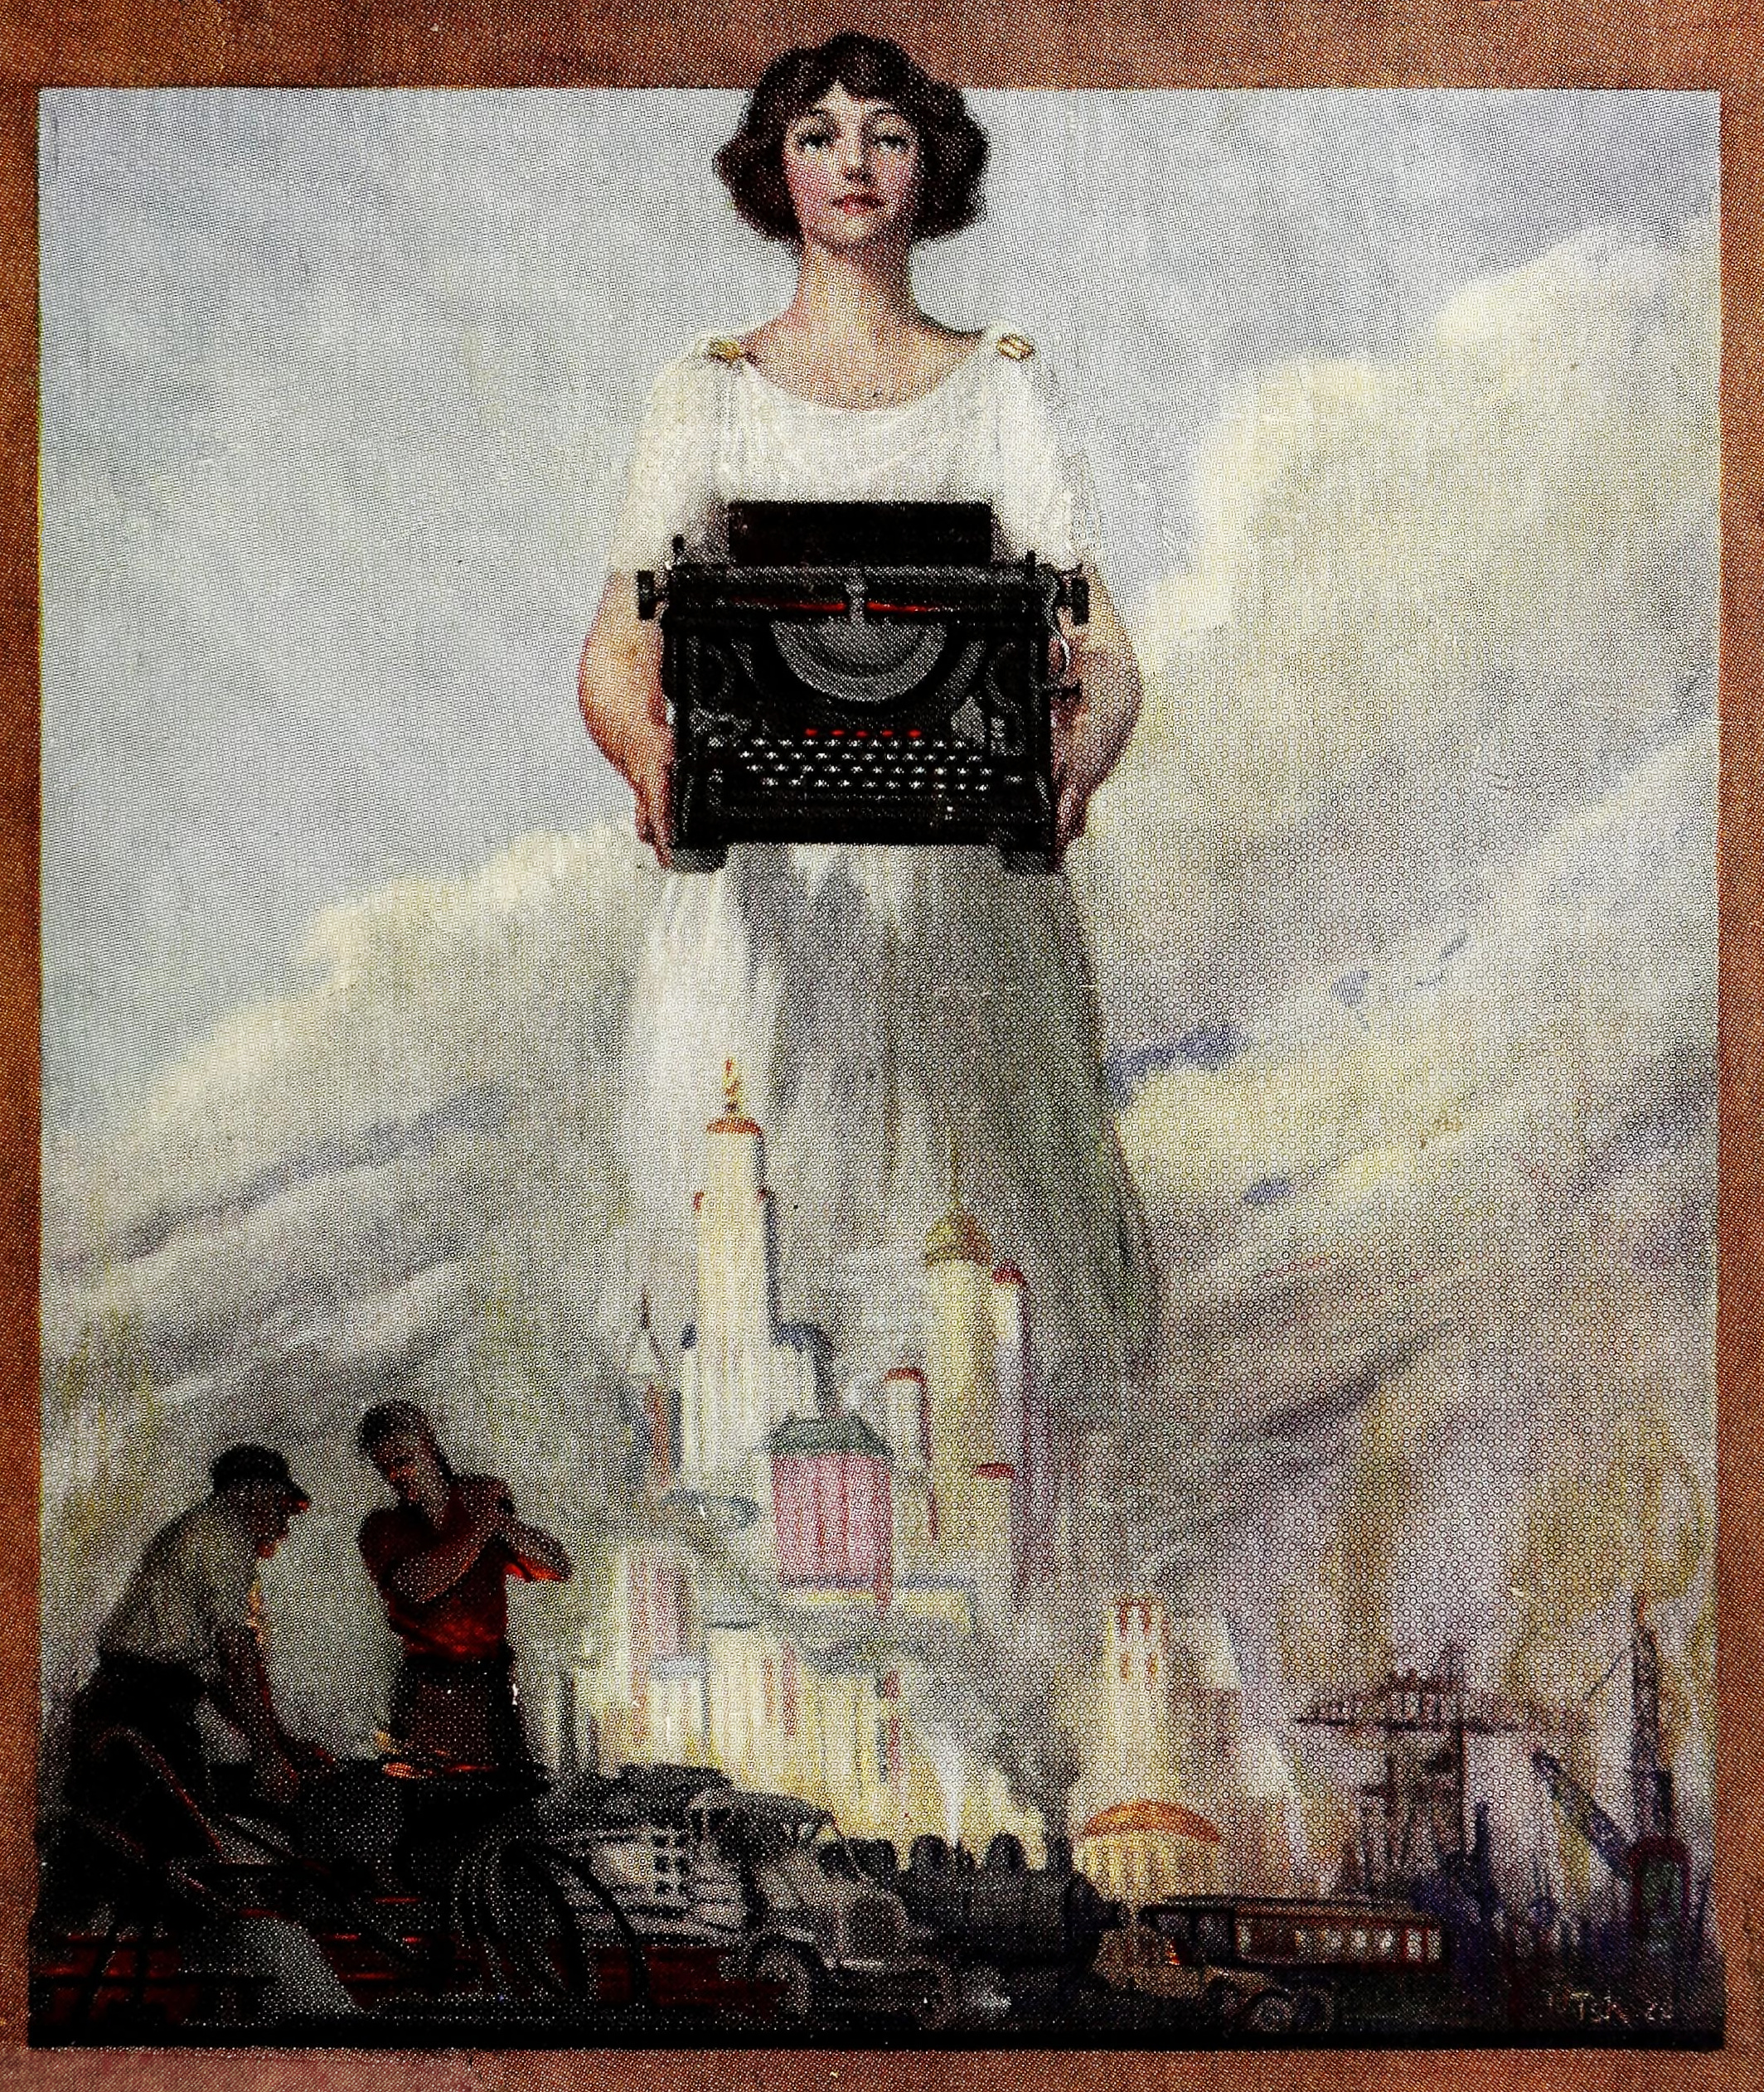 A giant woman holding a typewriter above a city skyline